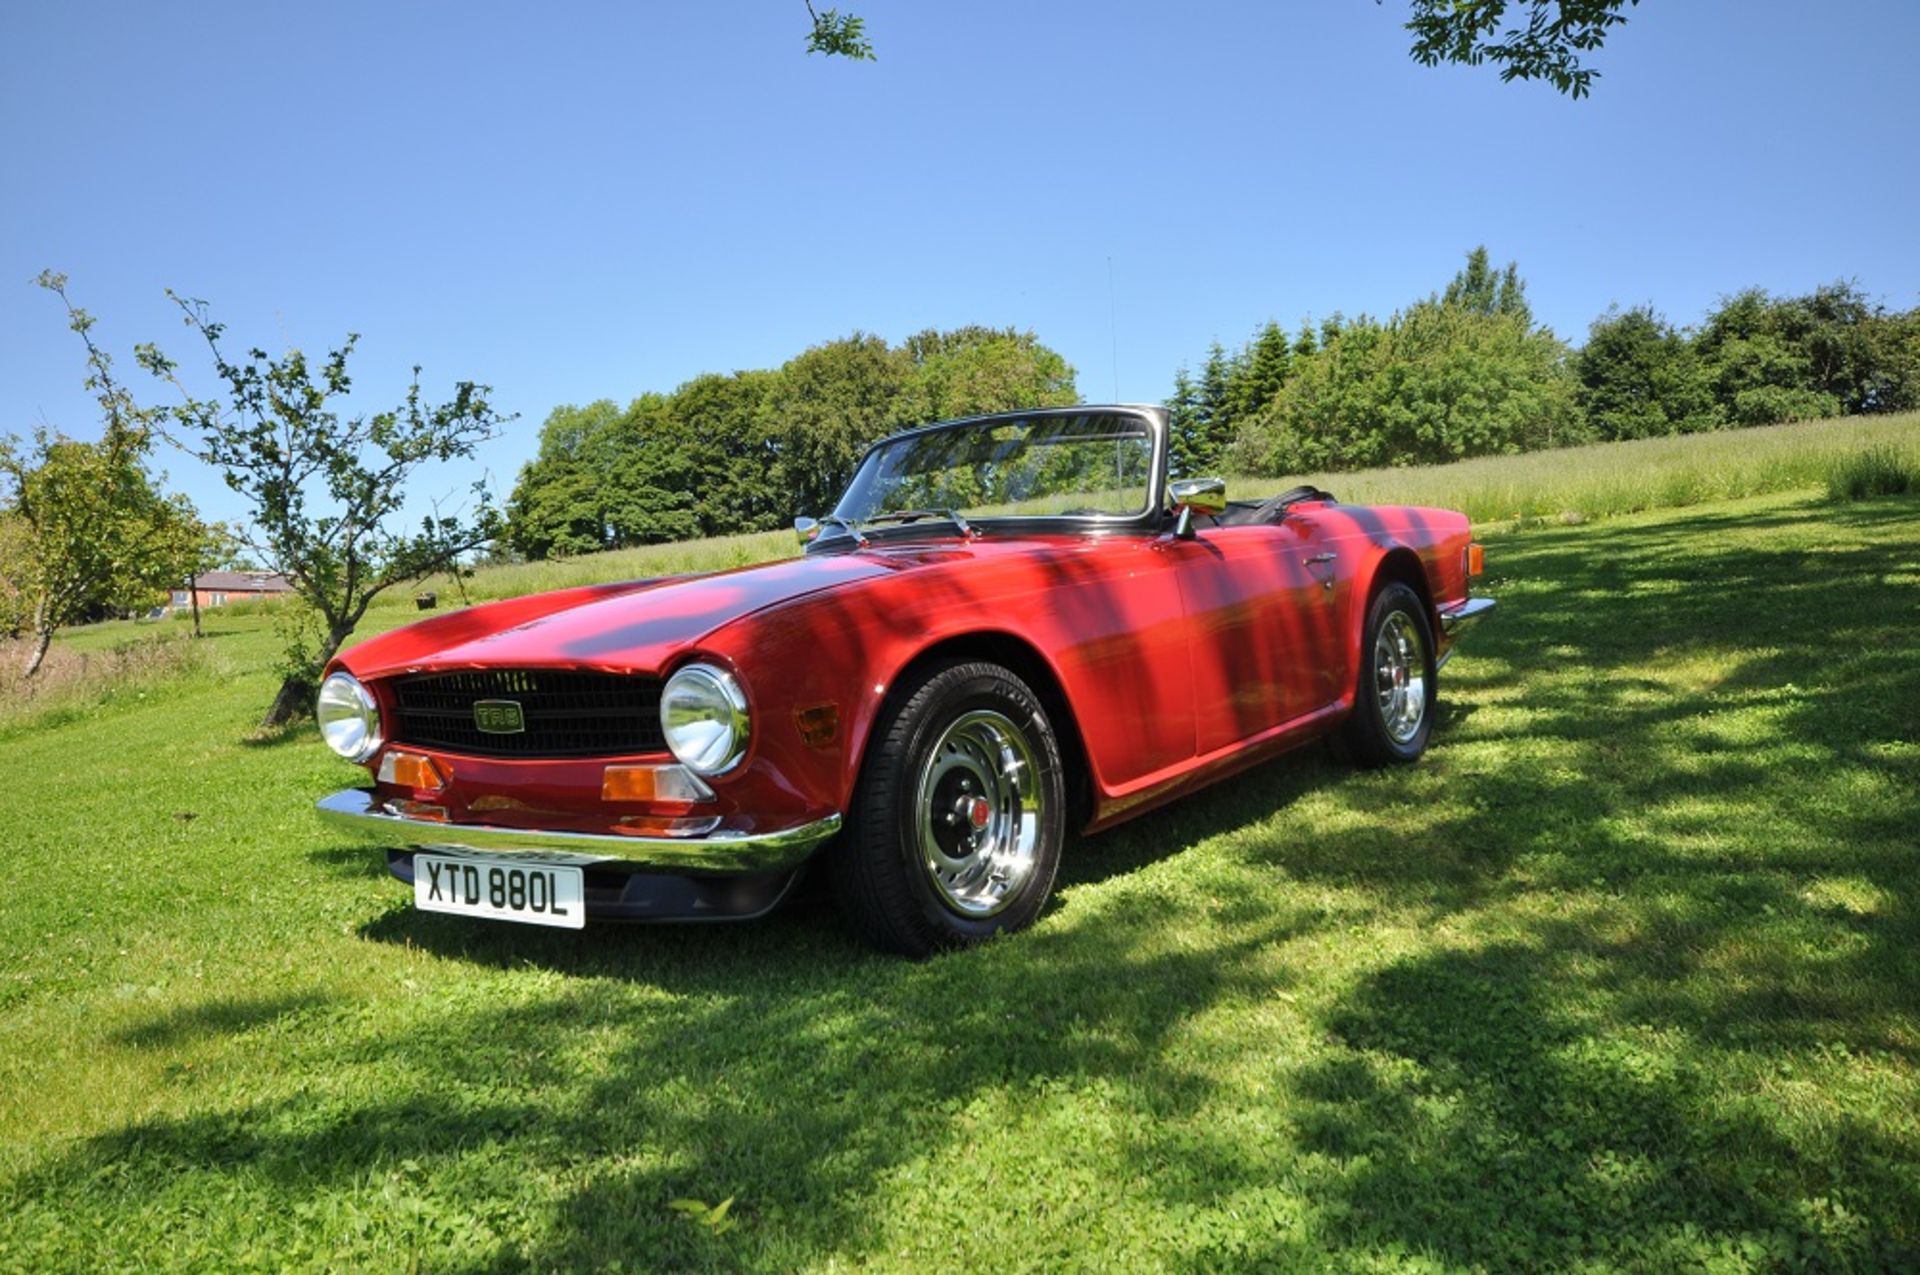 1973 Triumph TR6 2.5 injection RHD - Image 2 of 19